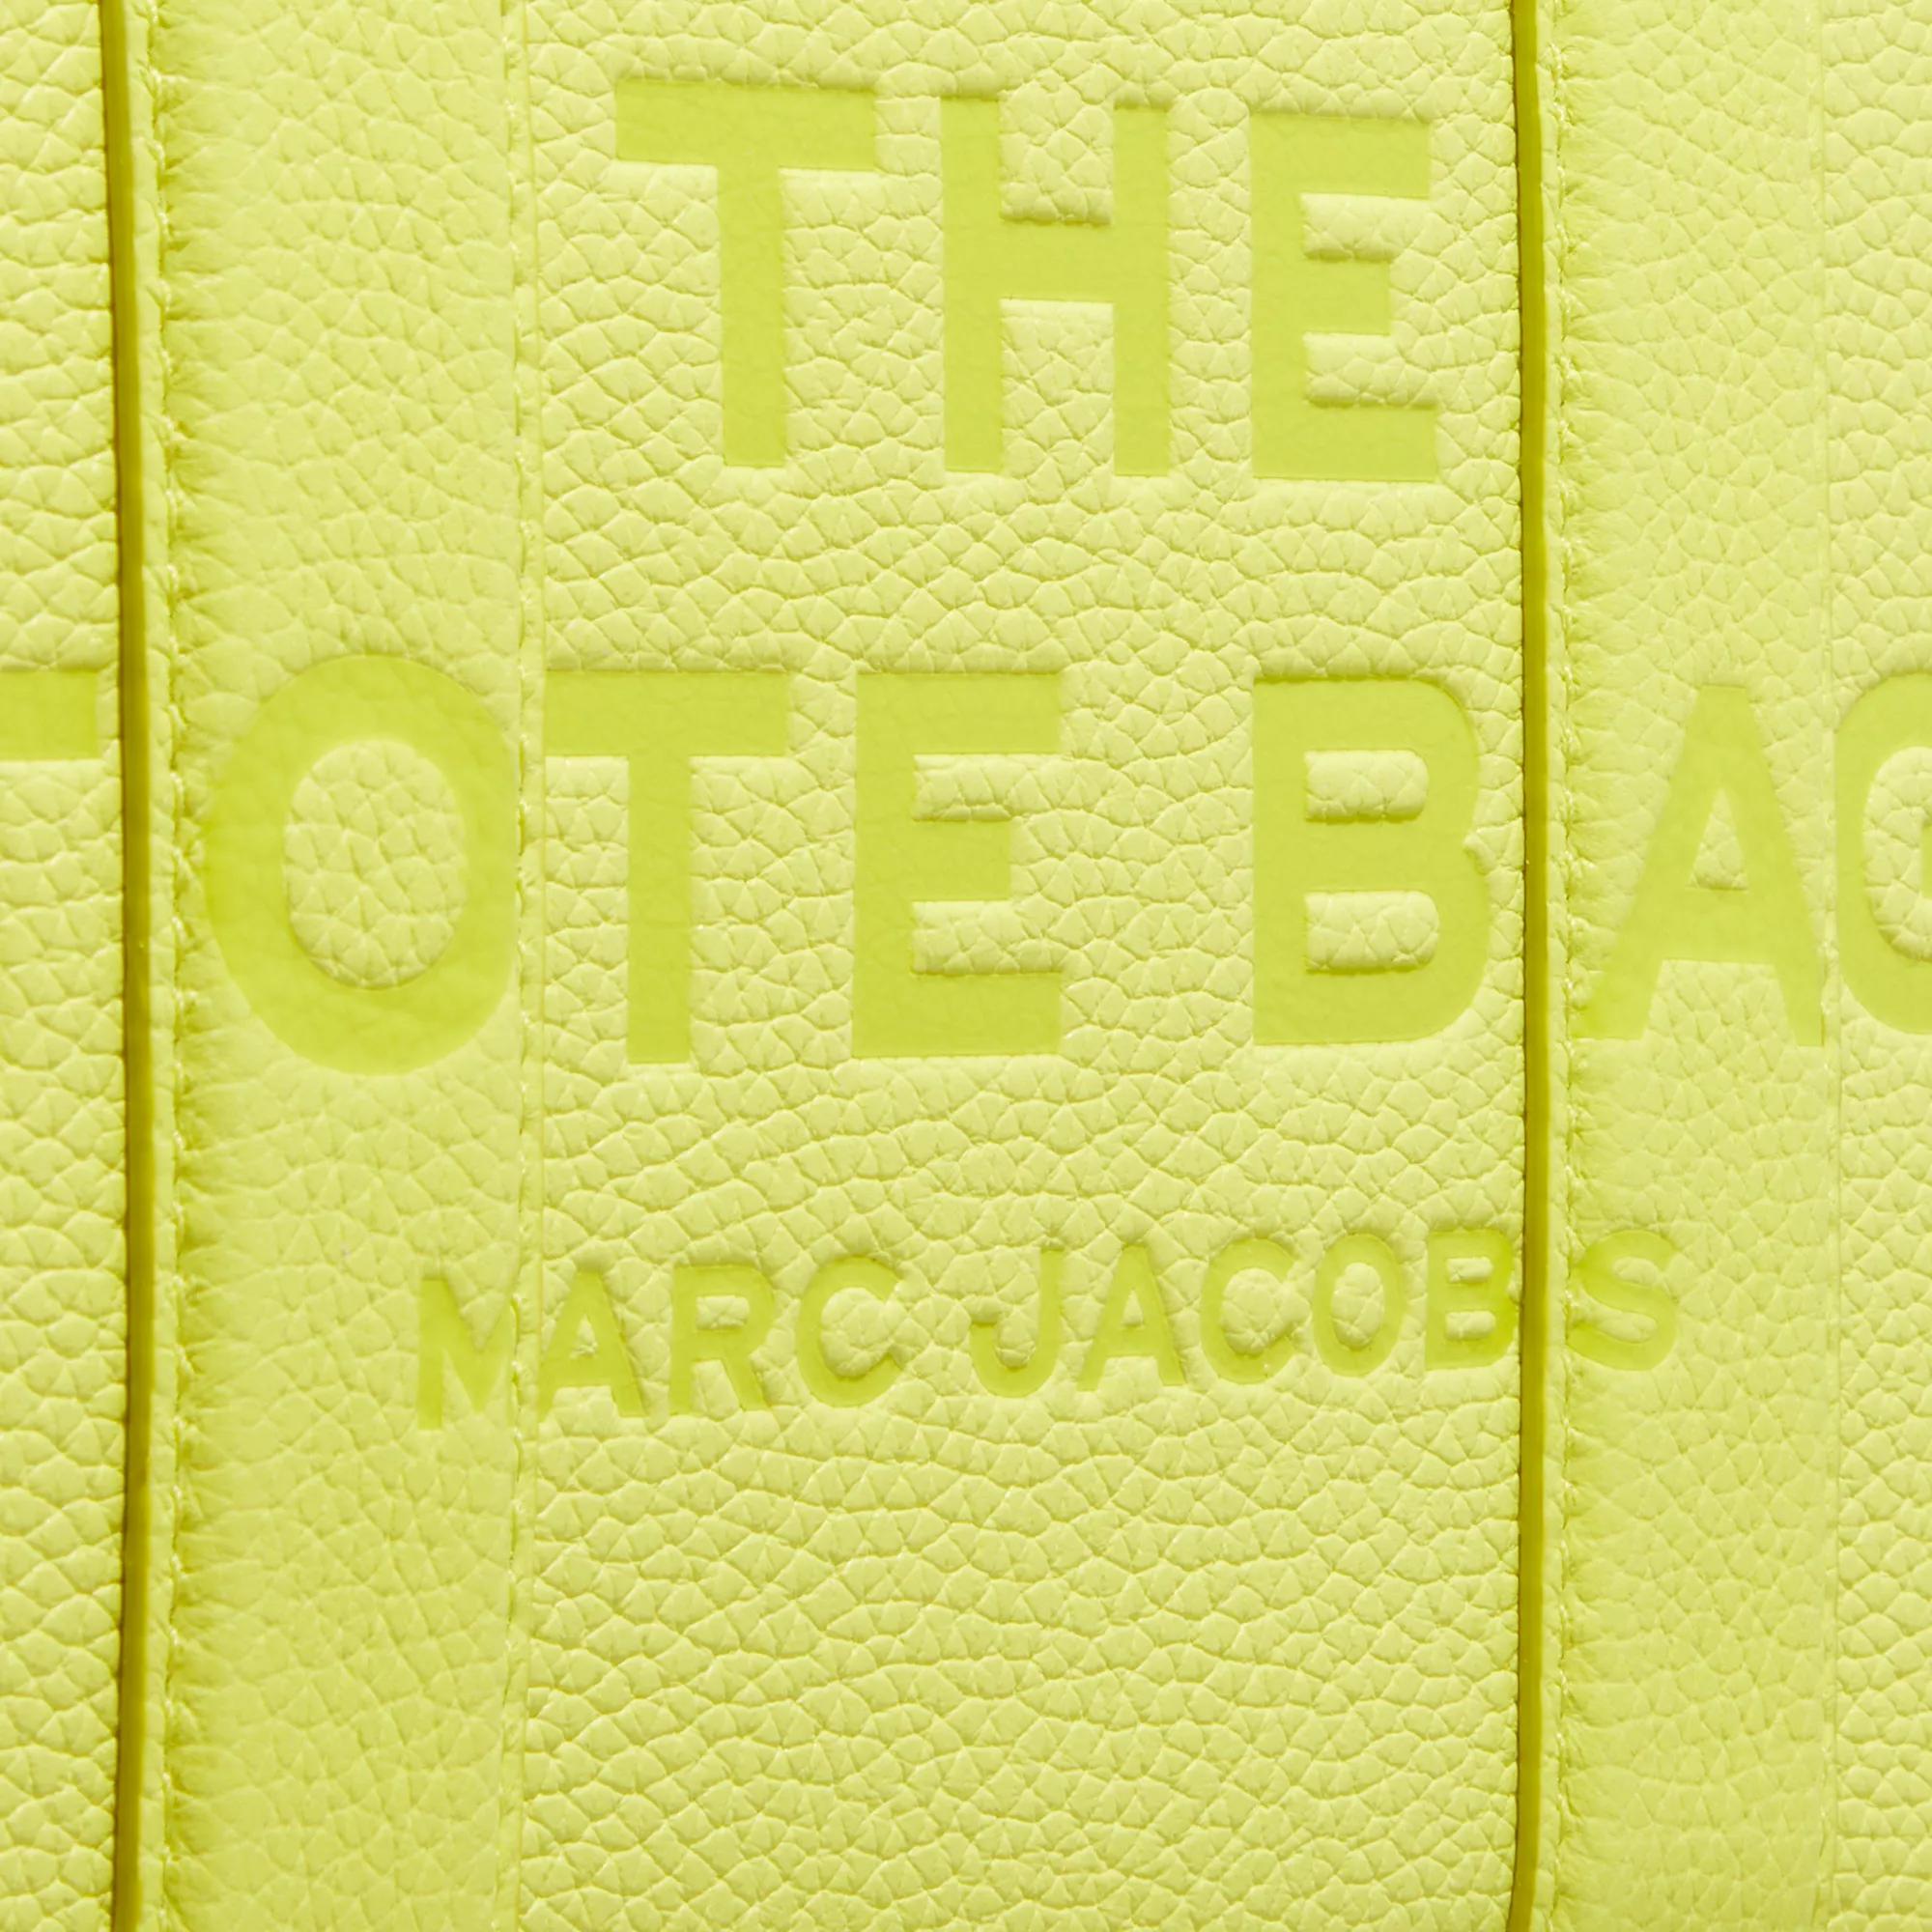 Marc Jacobs Totes The Small Tote Bag in geel